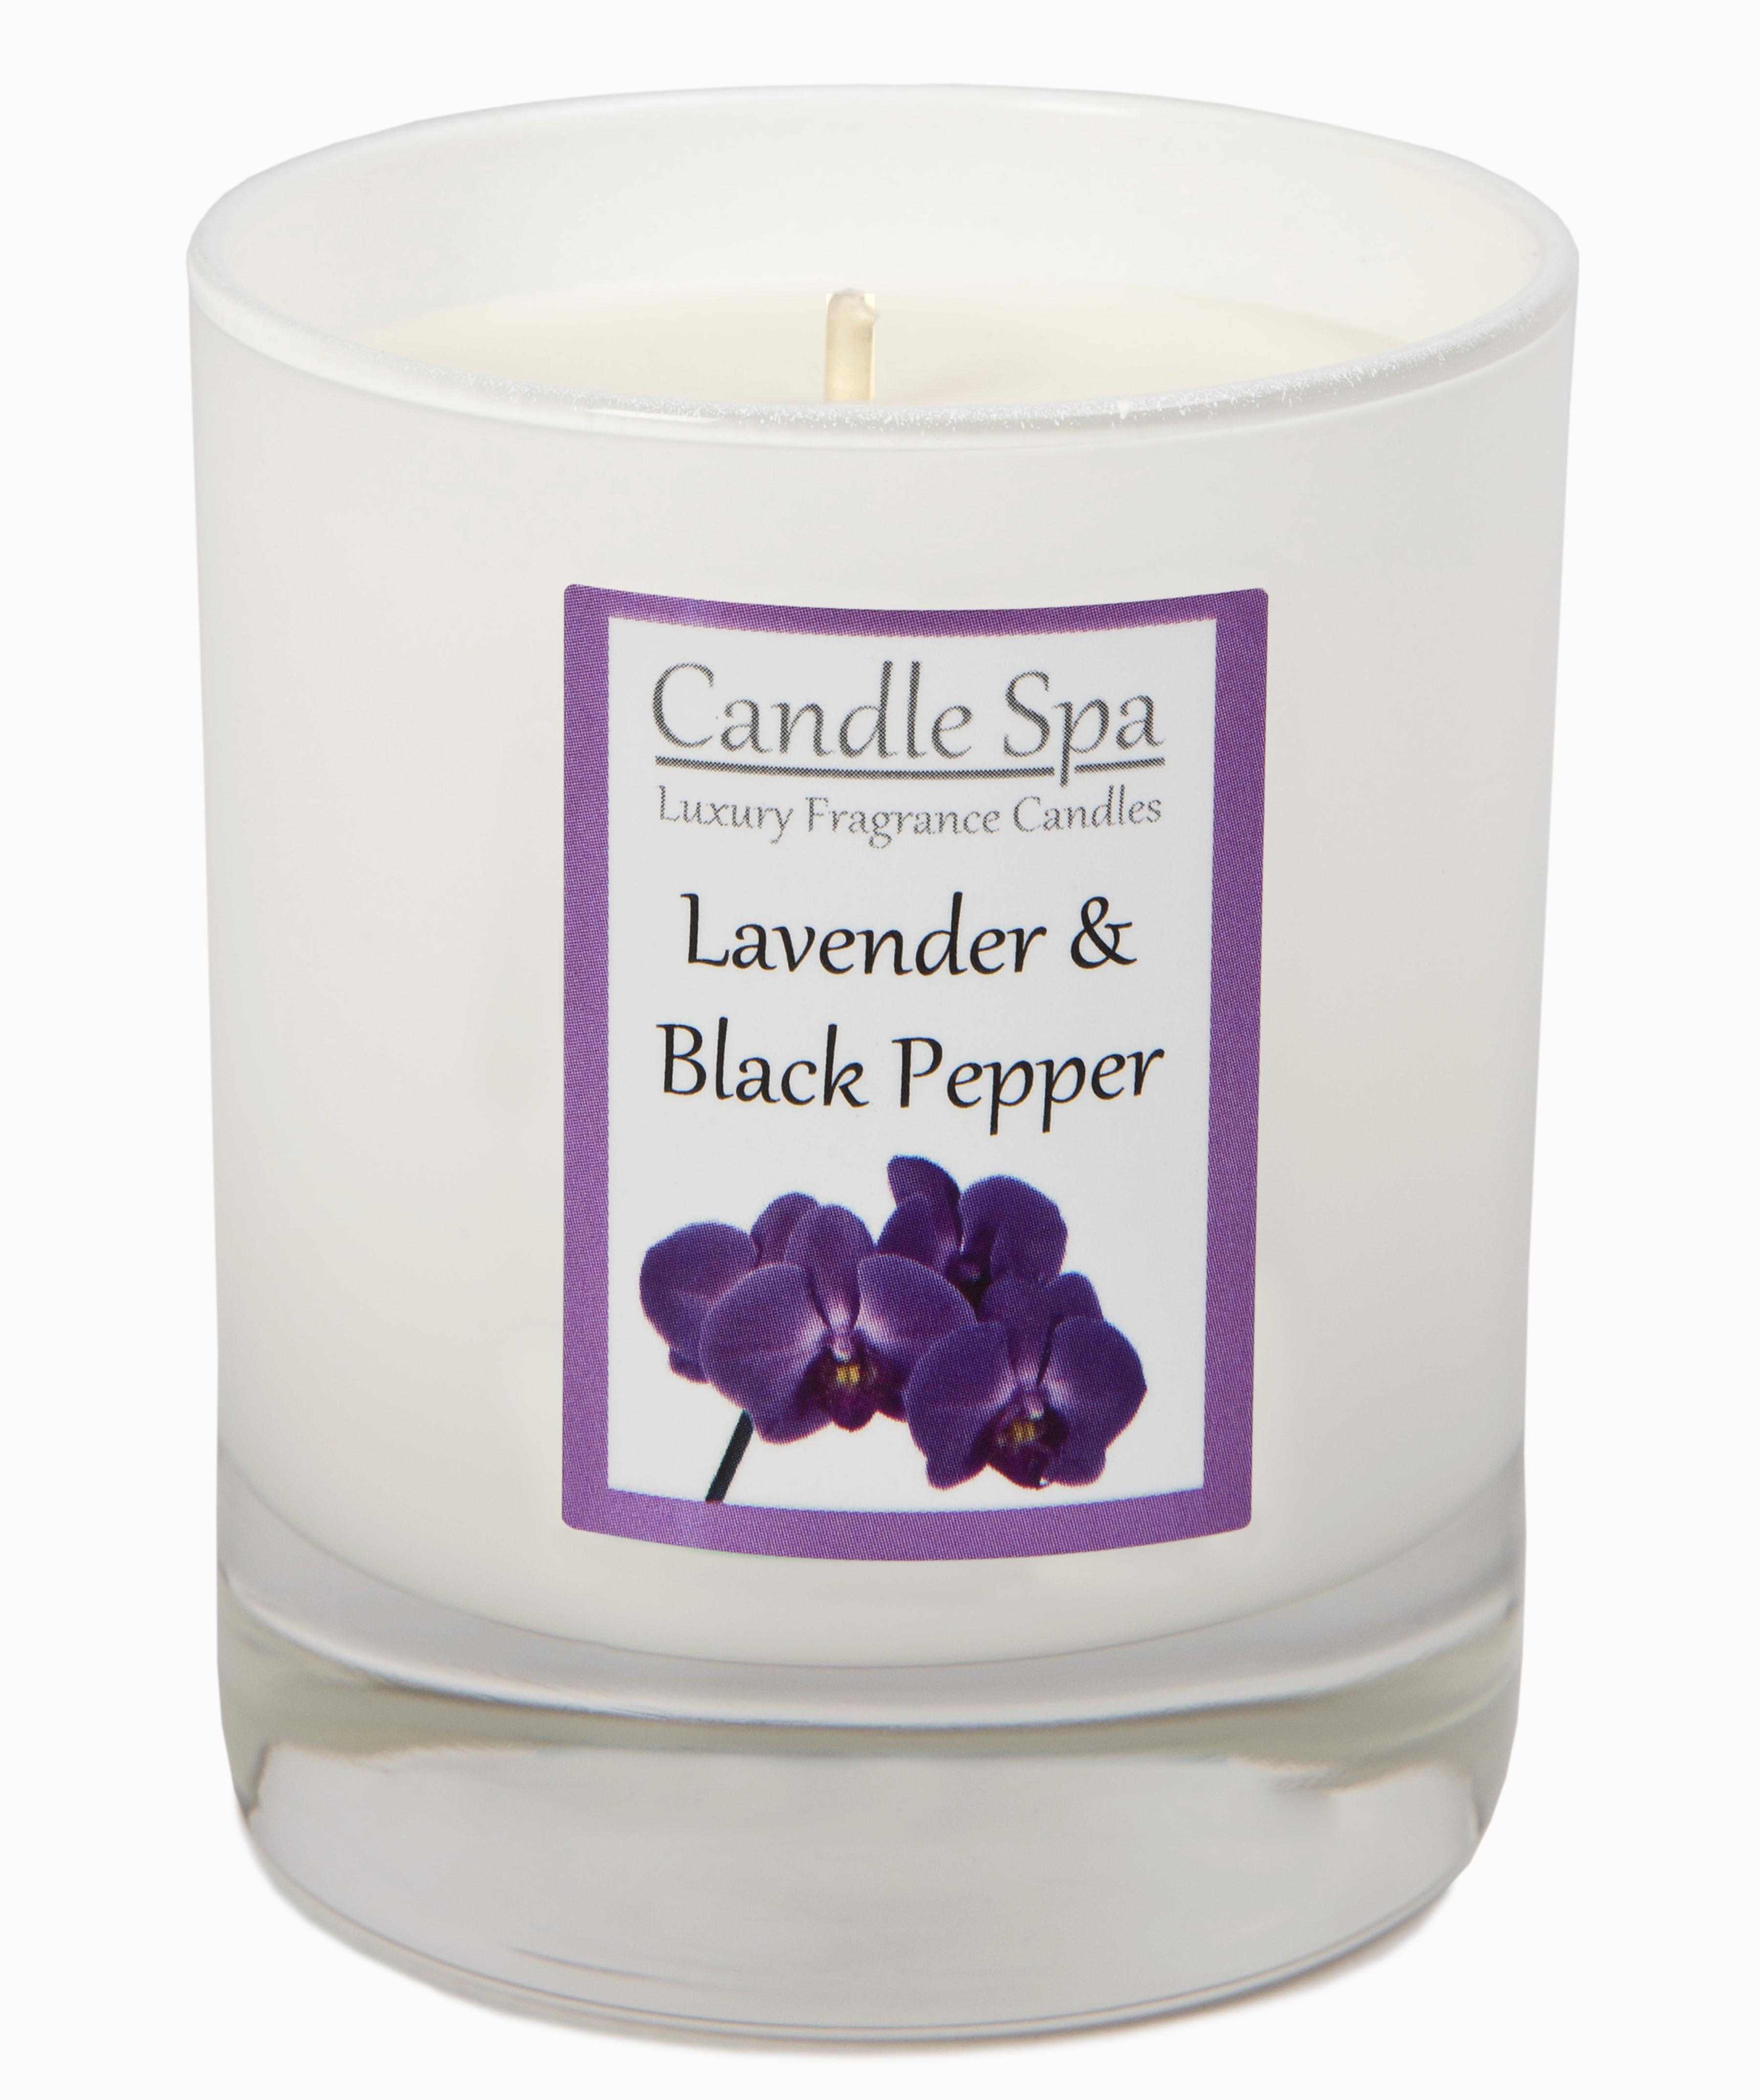 Candle Spa Luxury Candle in 20cl Tumbler - Lavender & Black Pepper